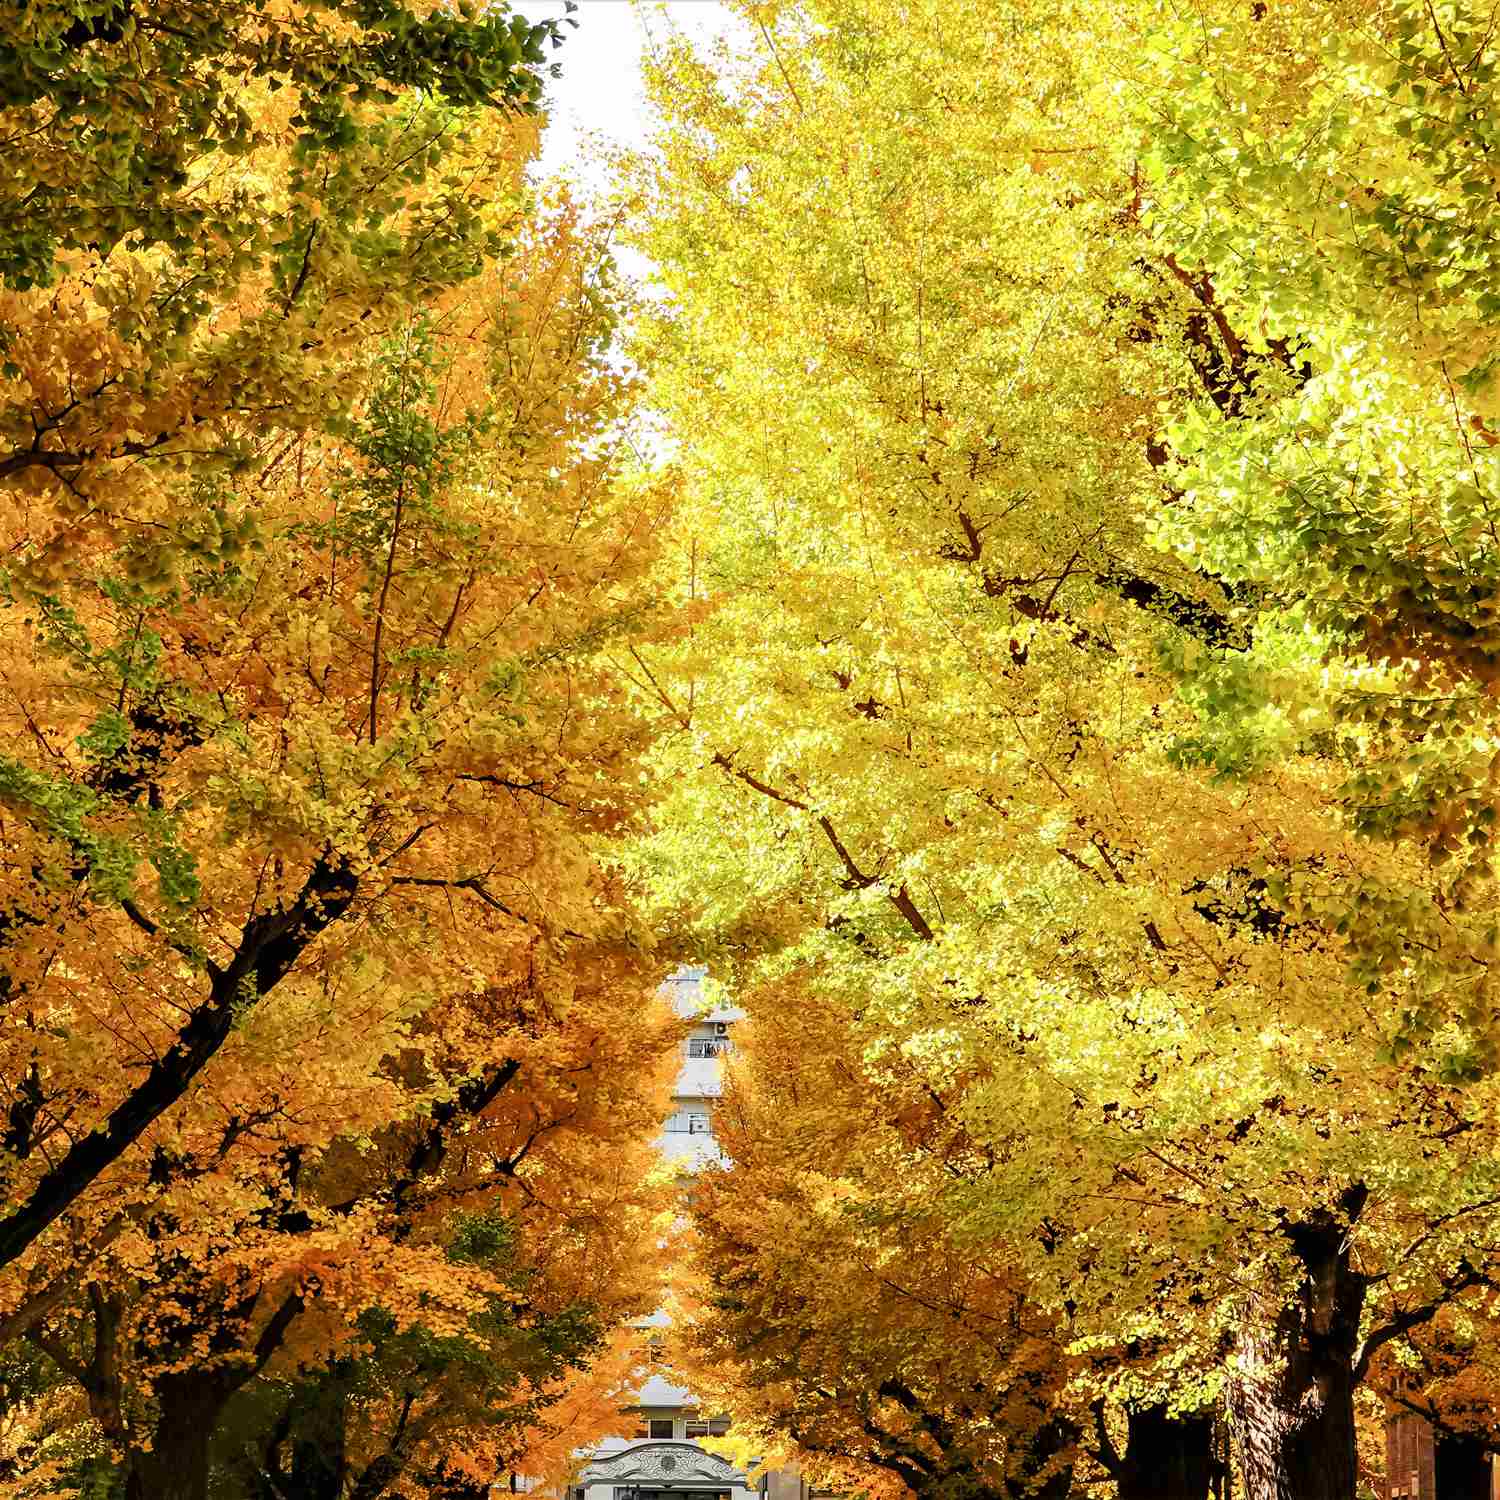 The Hongo campus of the University of Tokyo has beautiful autumn leaves in November, Tokyo = Shutterstock 4